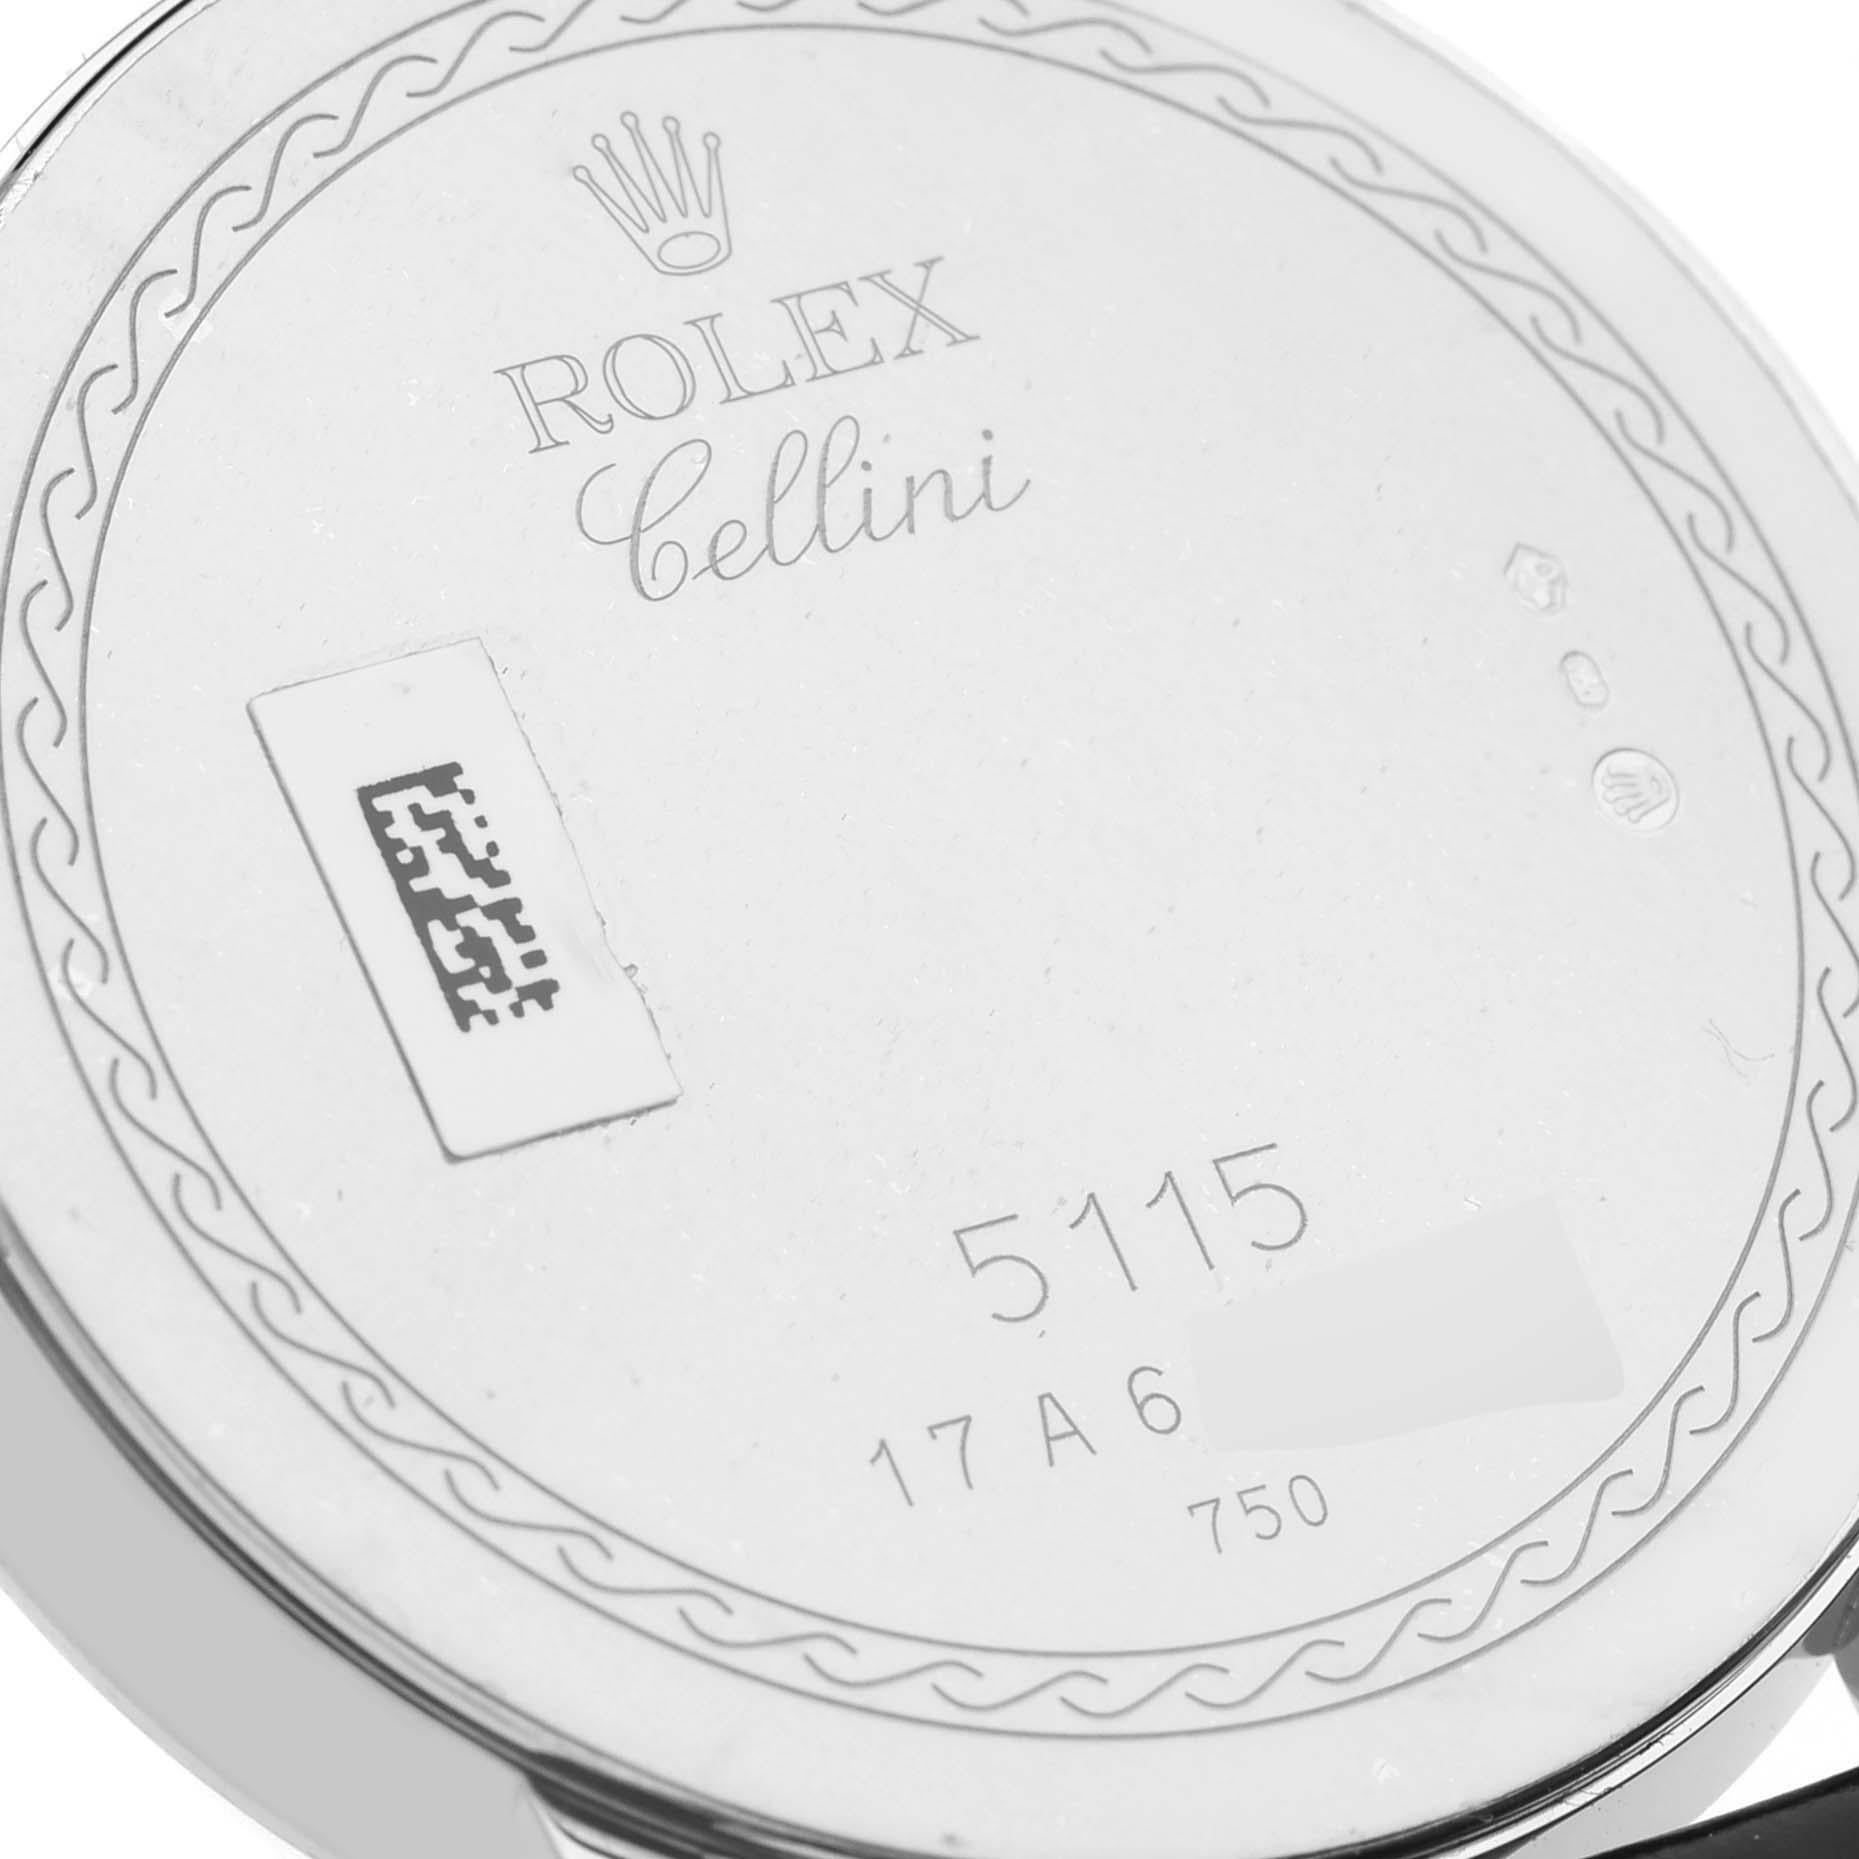 Rolex Cellini Classic White Gold Decorated Silver Dial Mens Watch 5115 Unworn For Sale 4